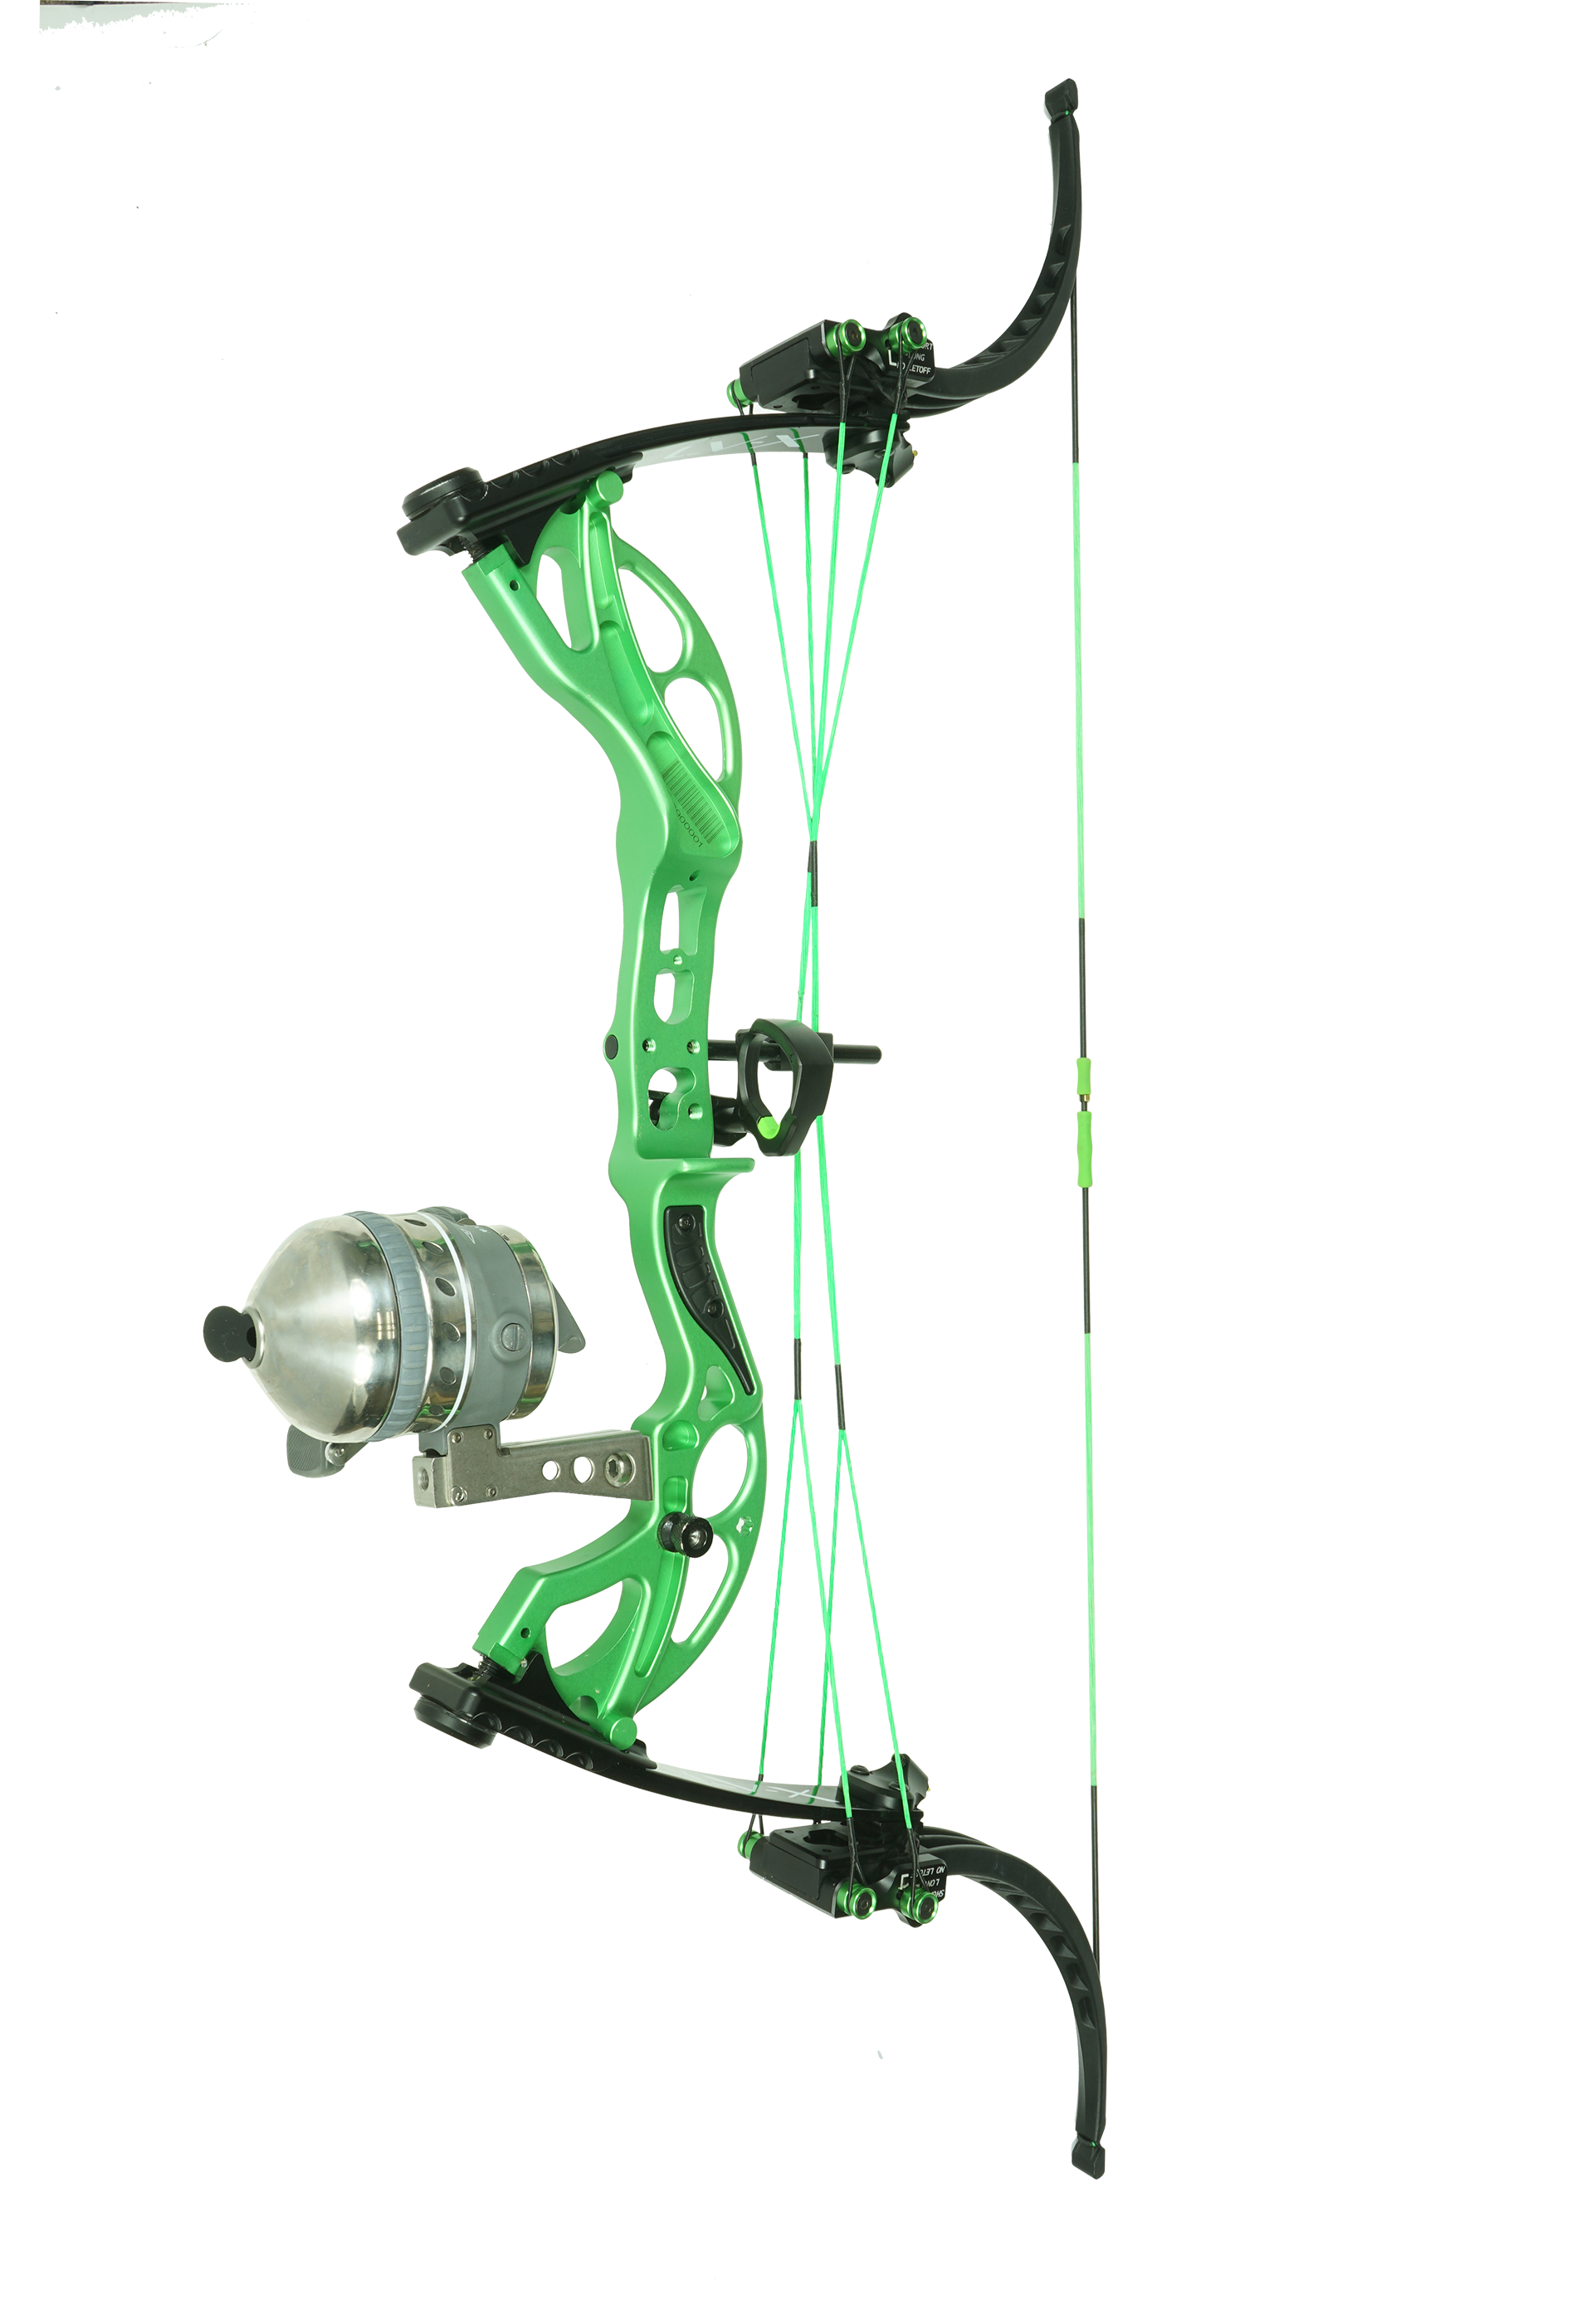 New Muzzy/Oneida Bow BowFishing Country, 56% OFF